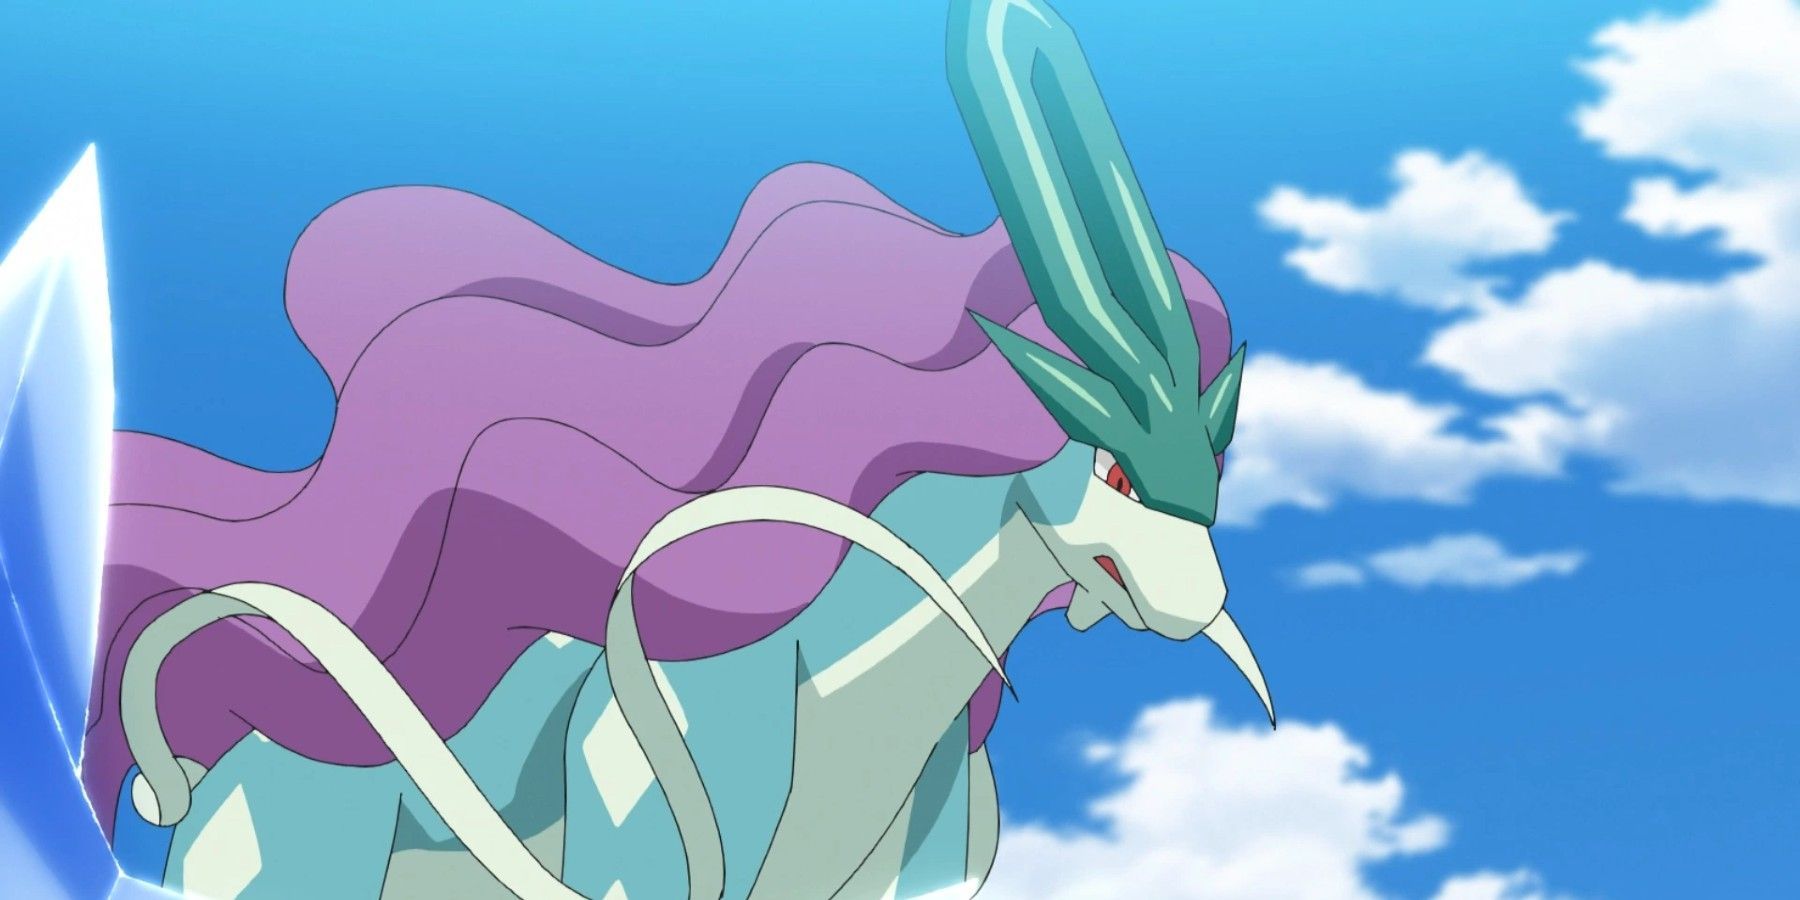 Mythical Suicune